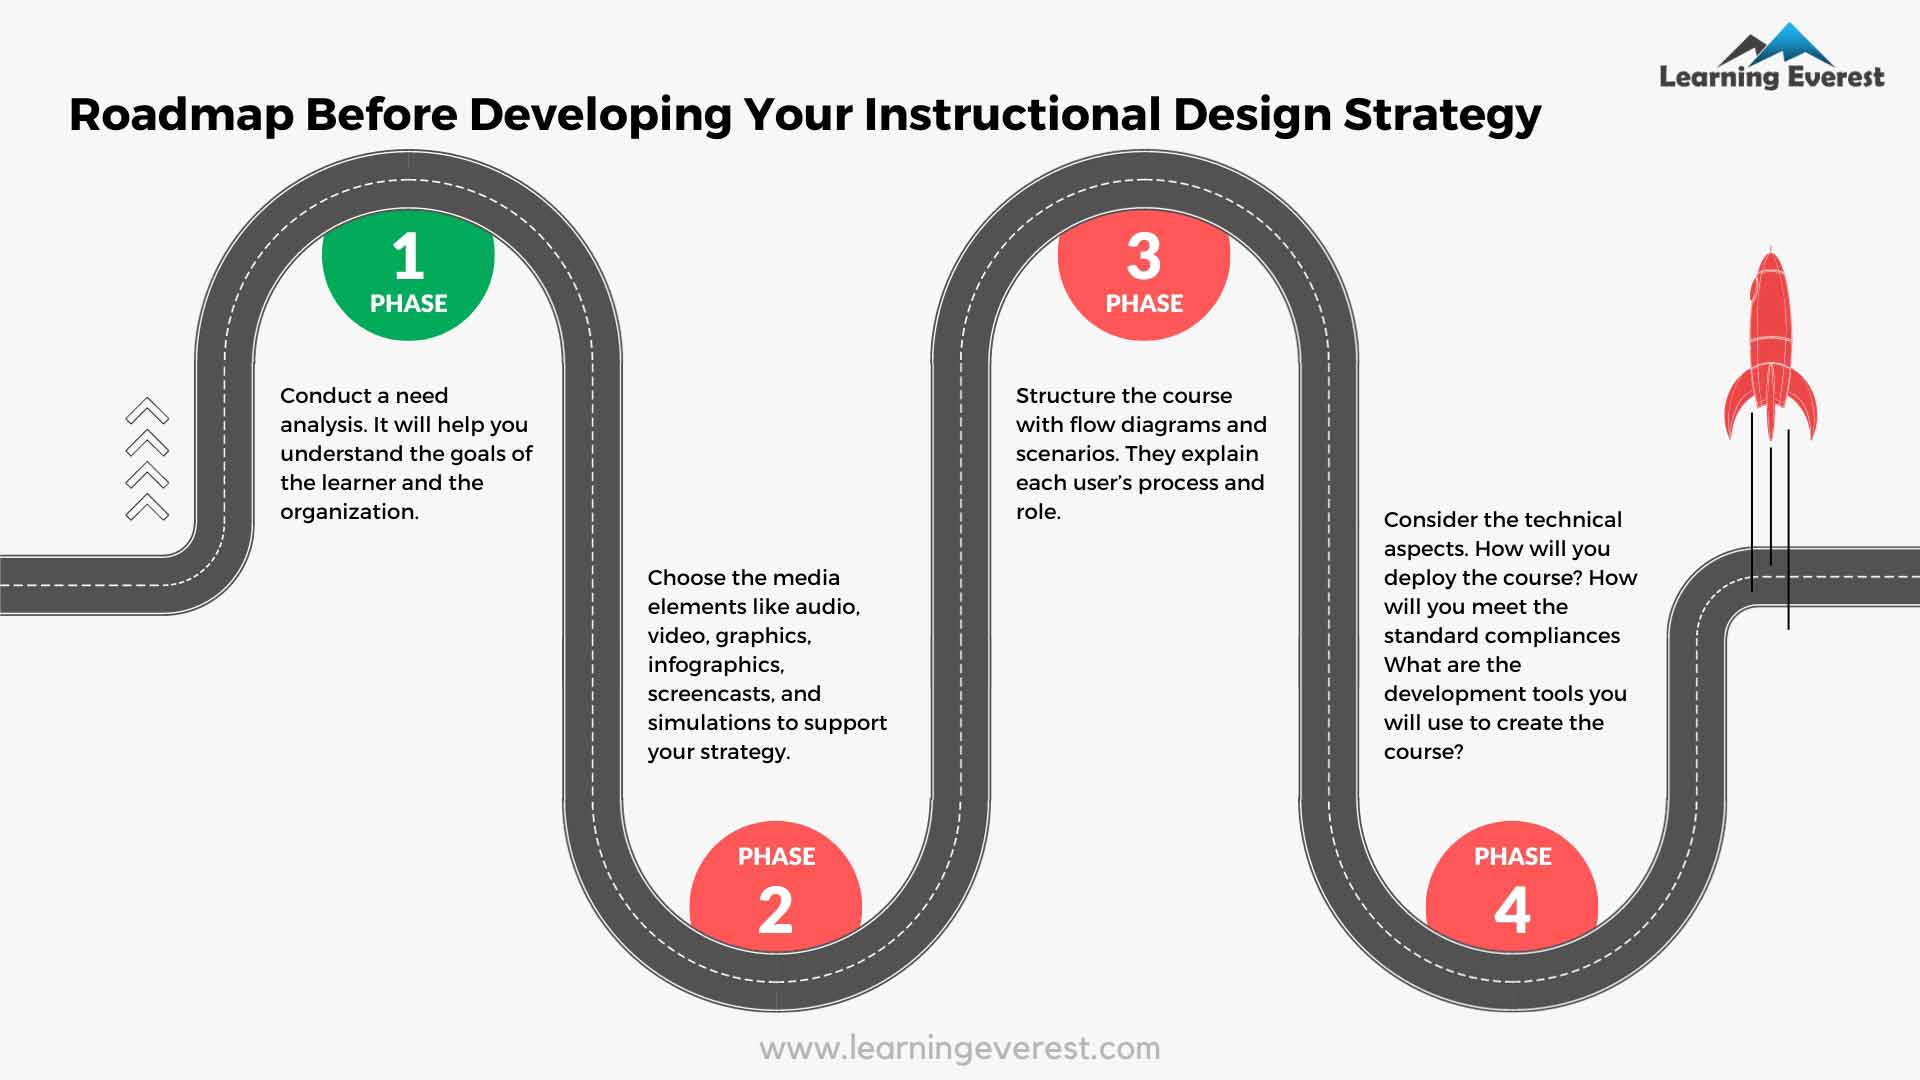 Roadmap Before Developing Your Instructional Design Strategy